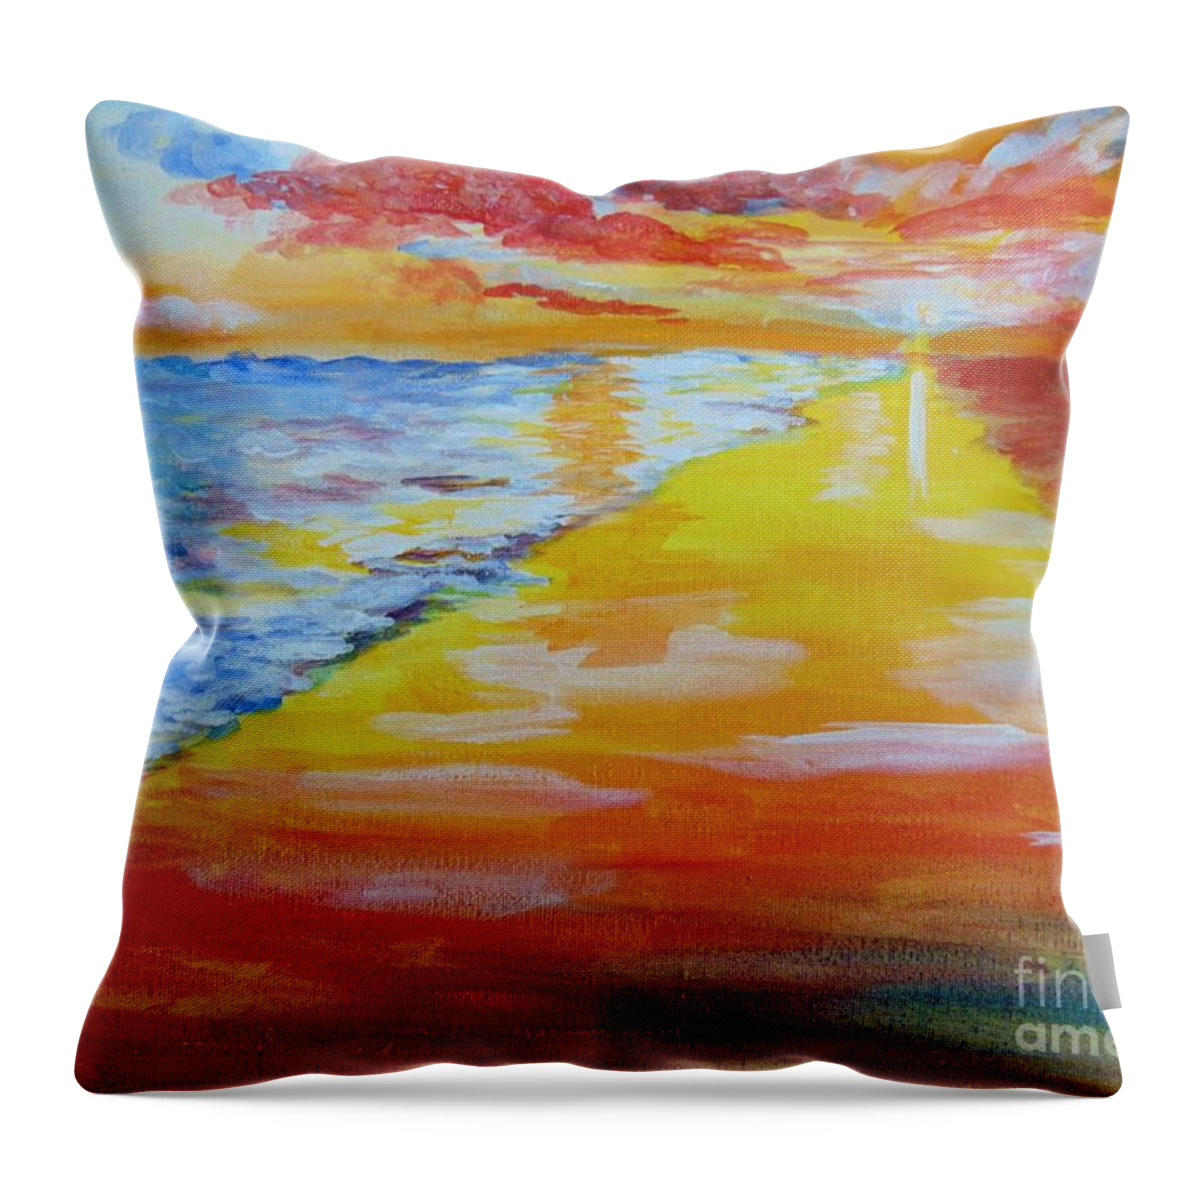 Water Throw Pillow featuring the painting Bright Beach by Saundra Johnson